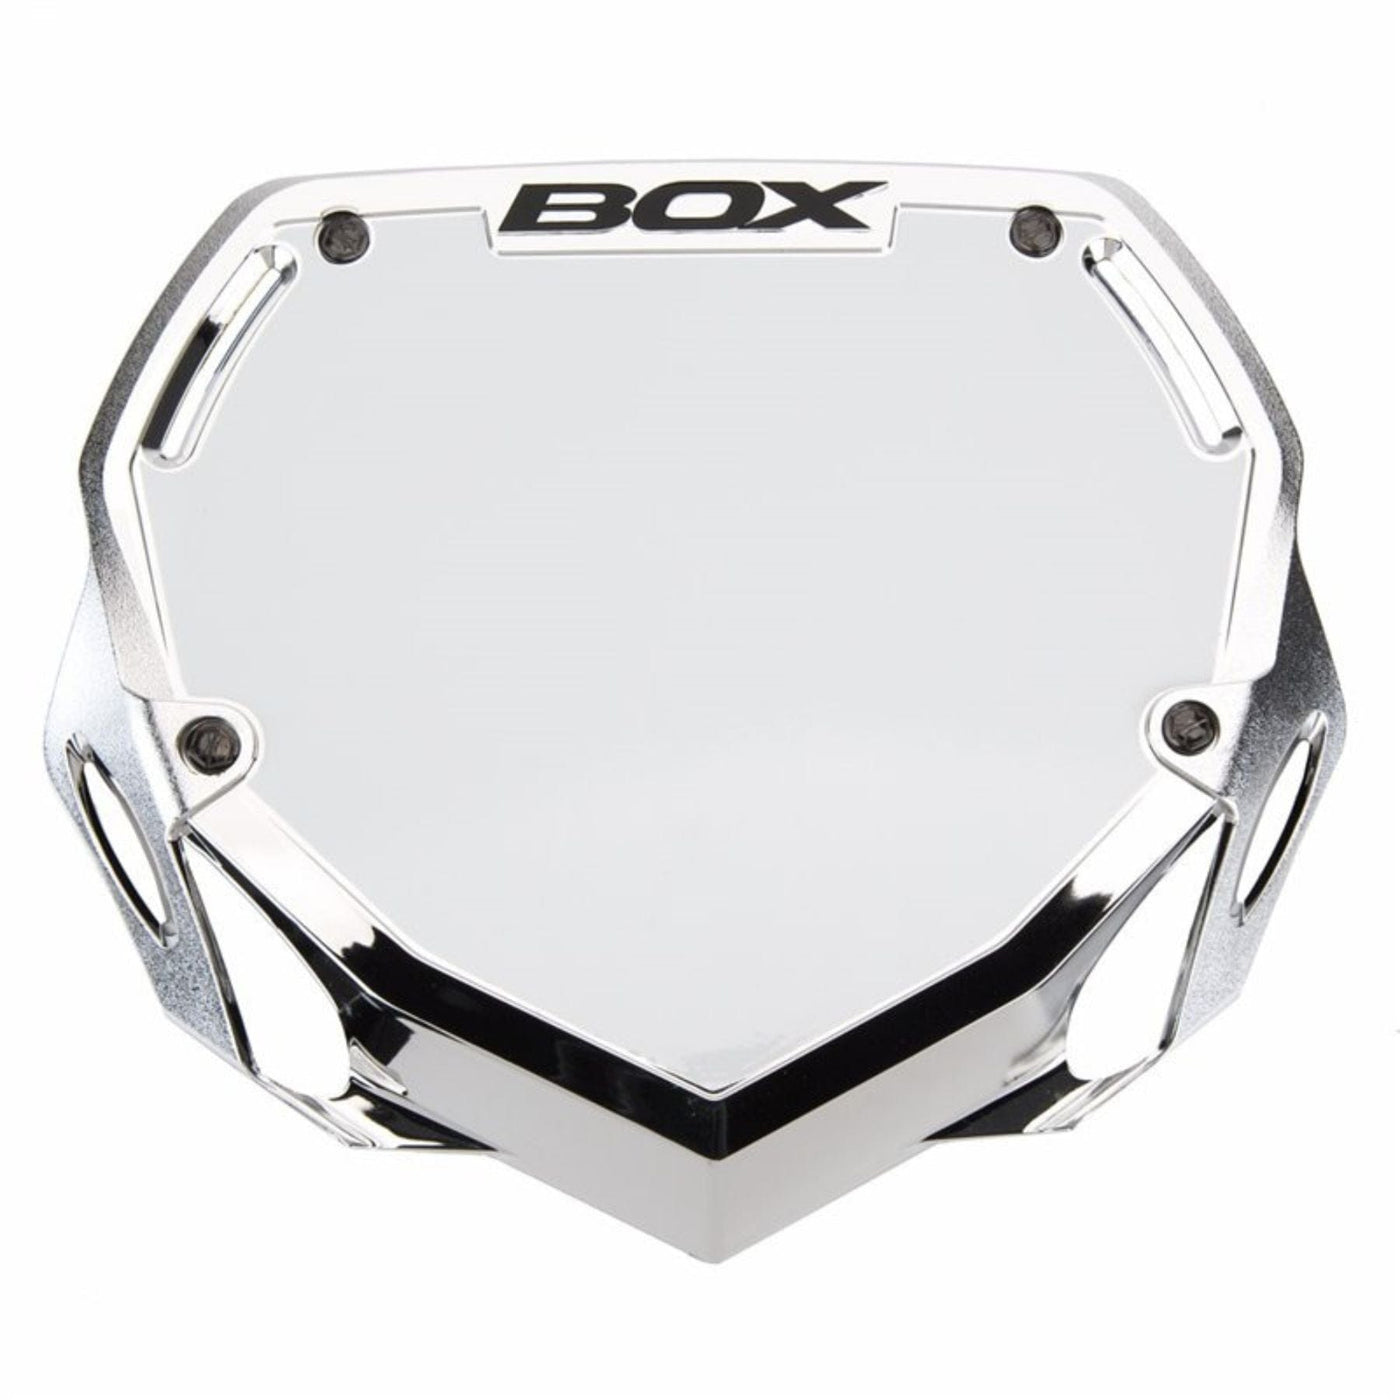 Box One BMX Racing Number Plate - Chrome Silver Large 8Lines Shop - Fast Shipping